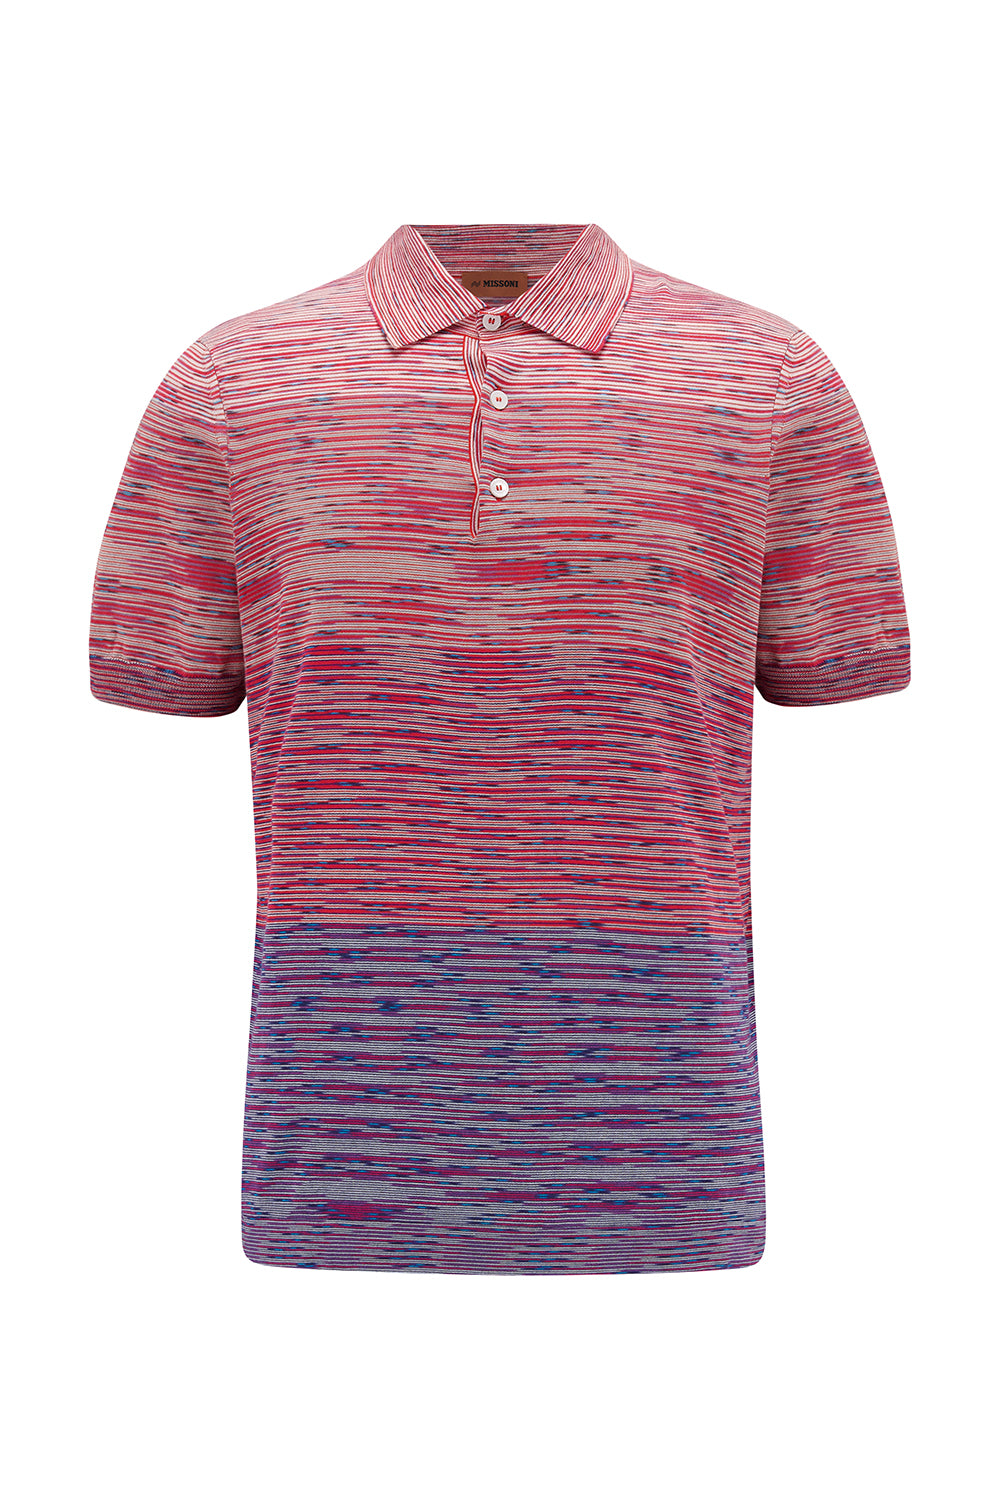 Missoni Men’s Knitted Stripe Polo Shirt Pink - Front View